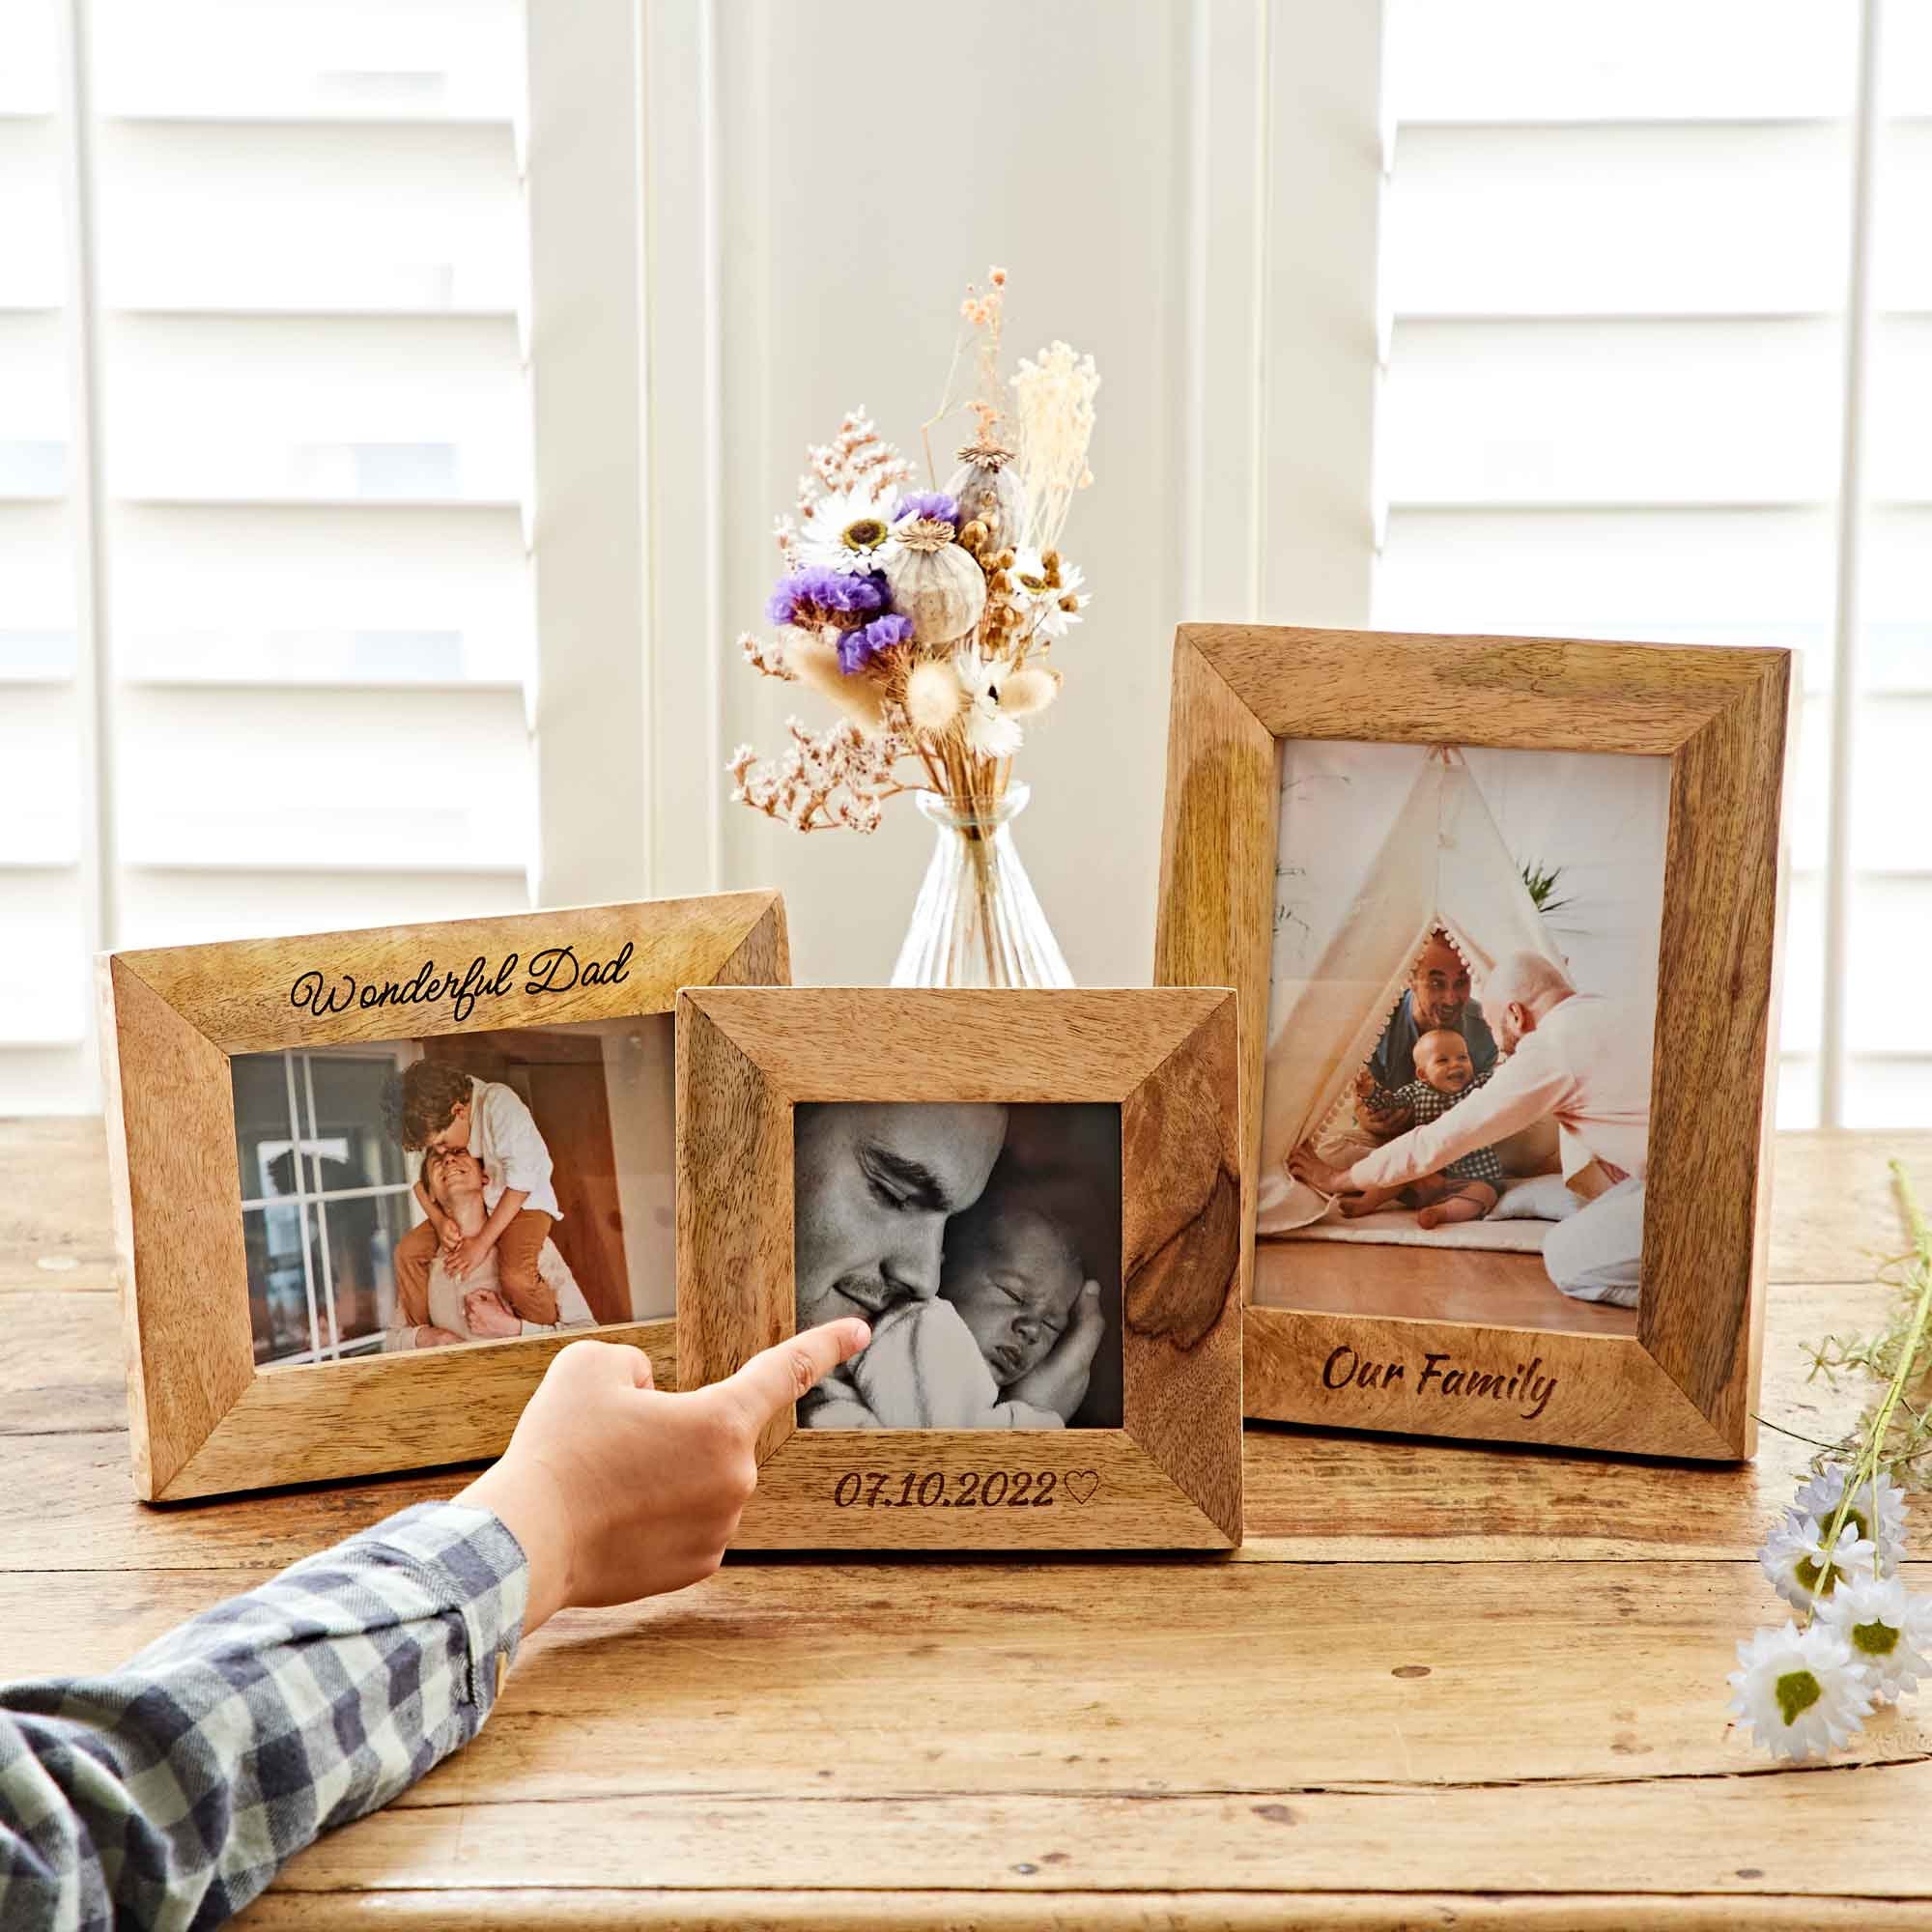 4x6 Inch Vintage Metal Photo Picture Frames For Home Decor, Gifts